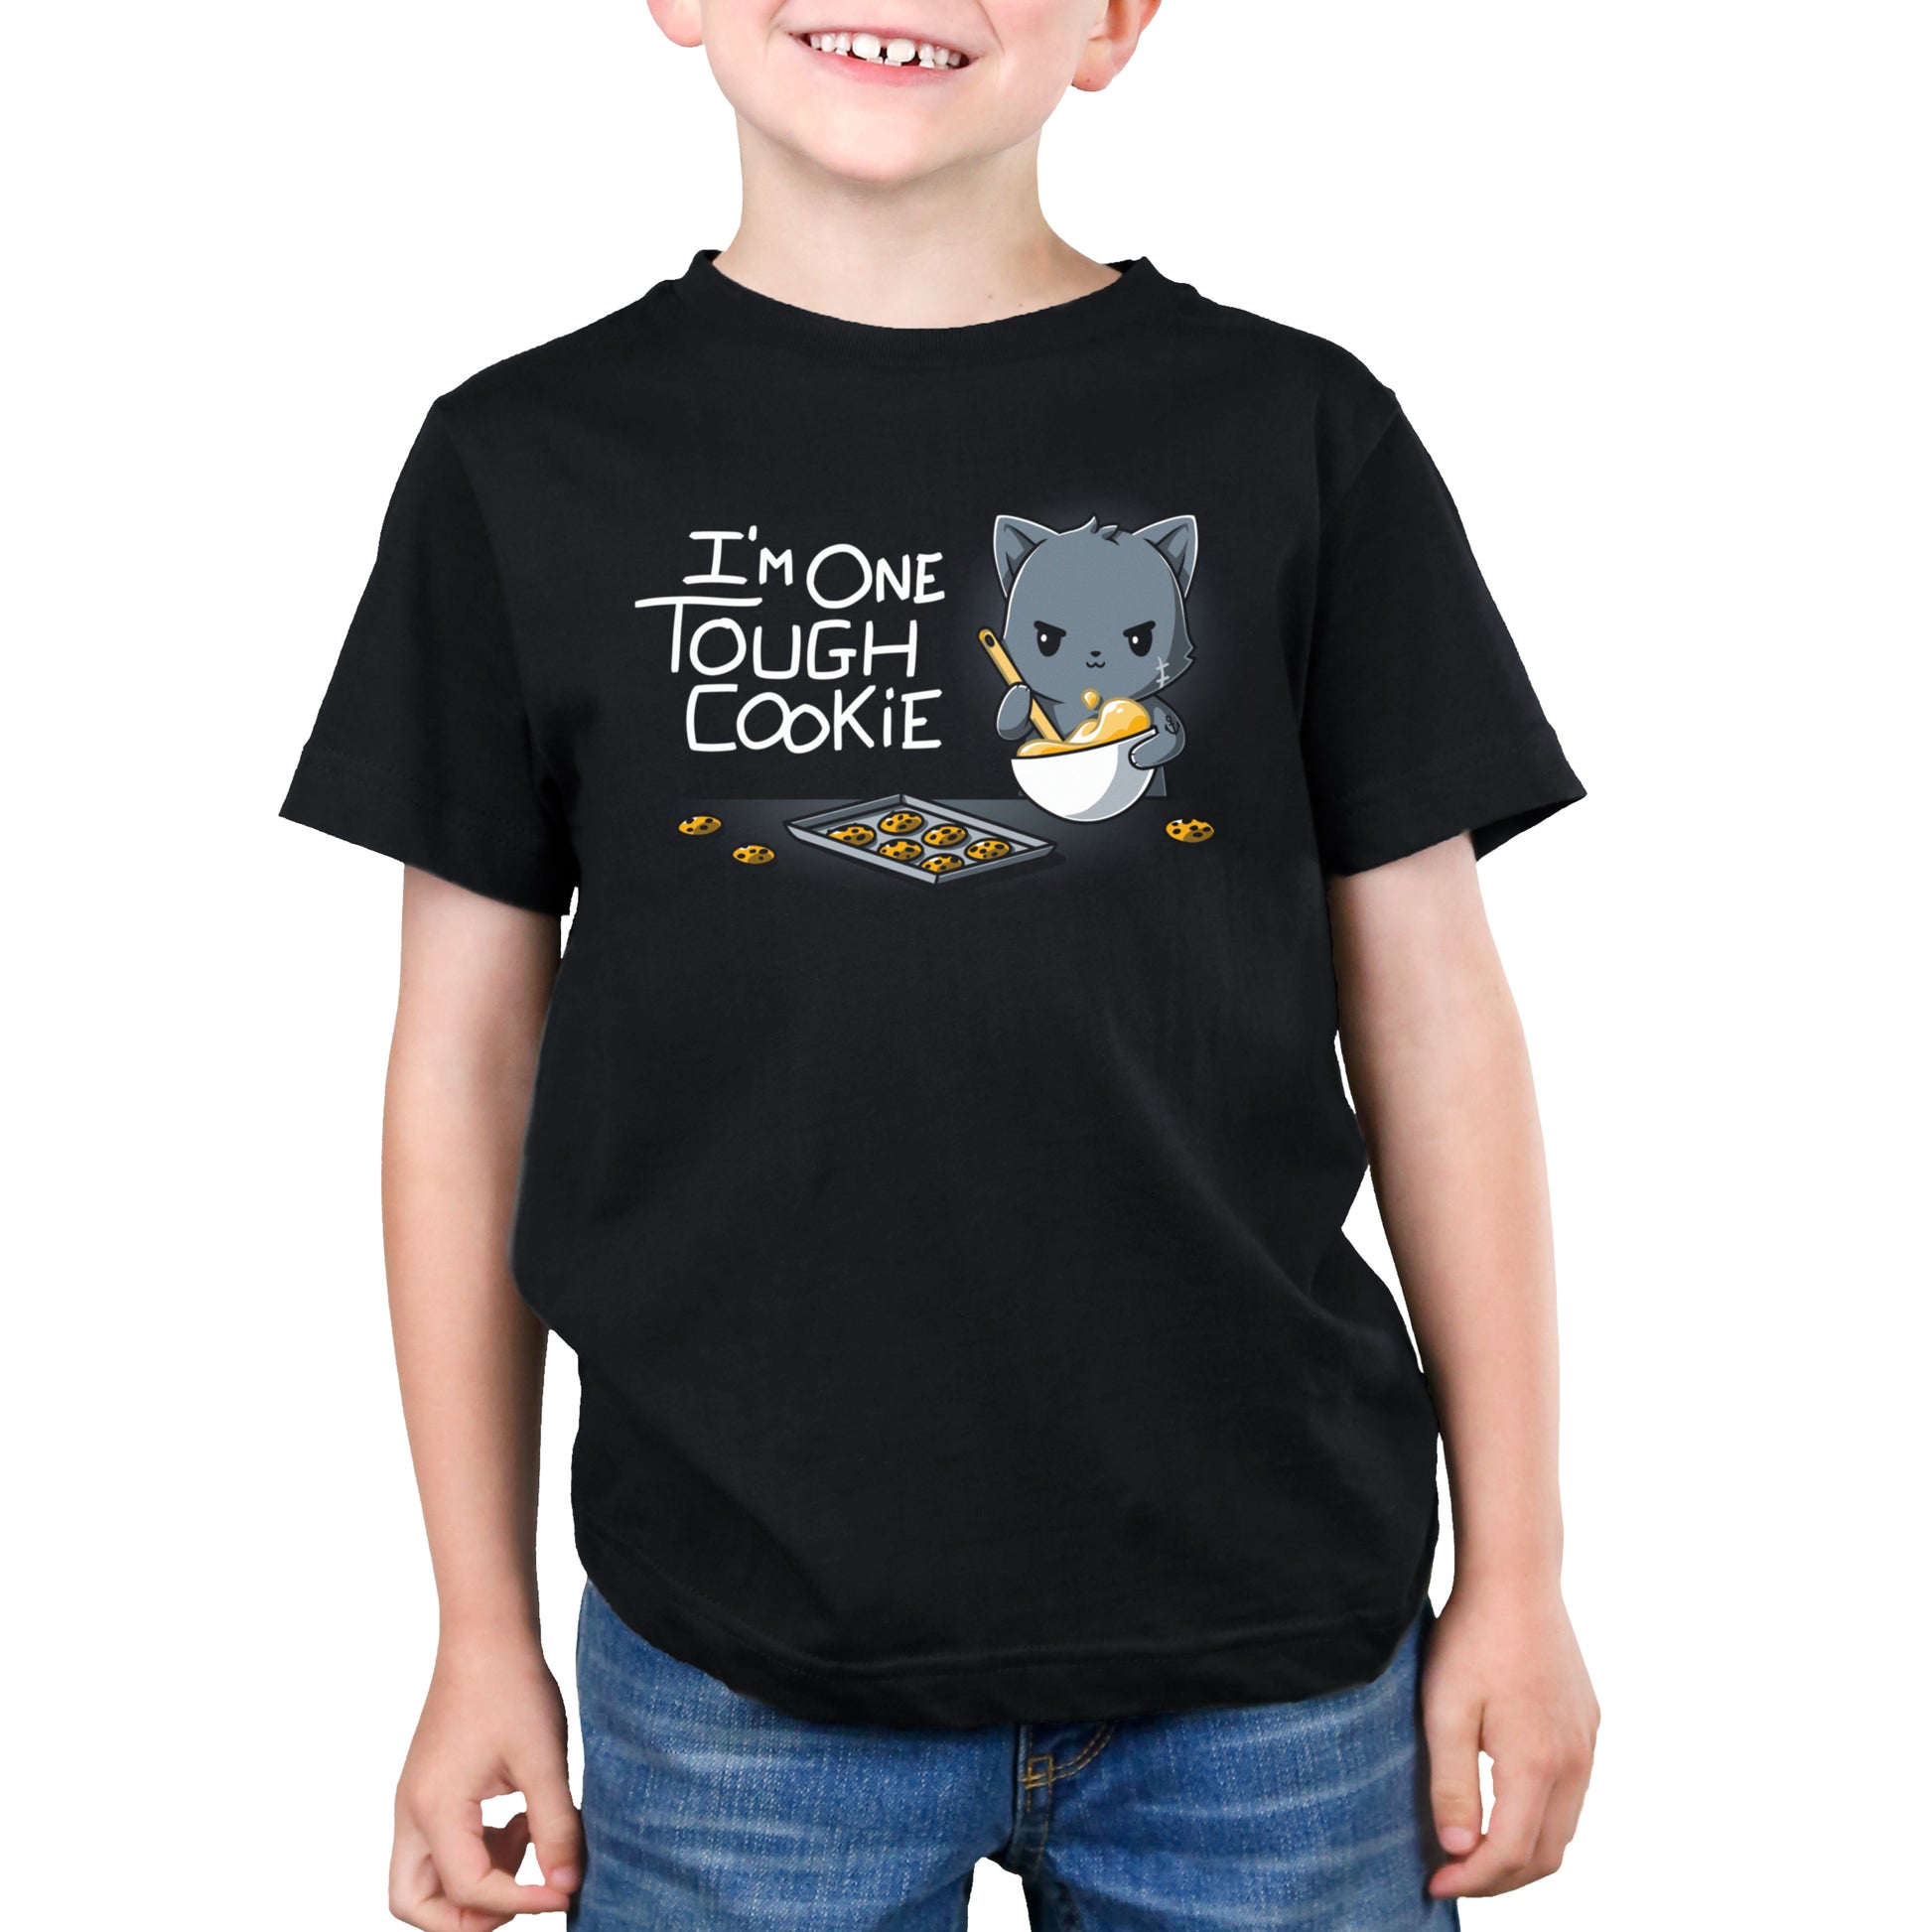 TeeTurtle's "I'm One Tough Cookie" black t-shirt for kids.